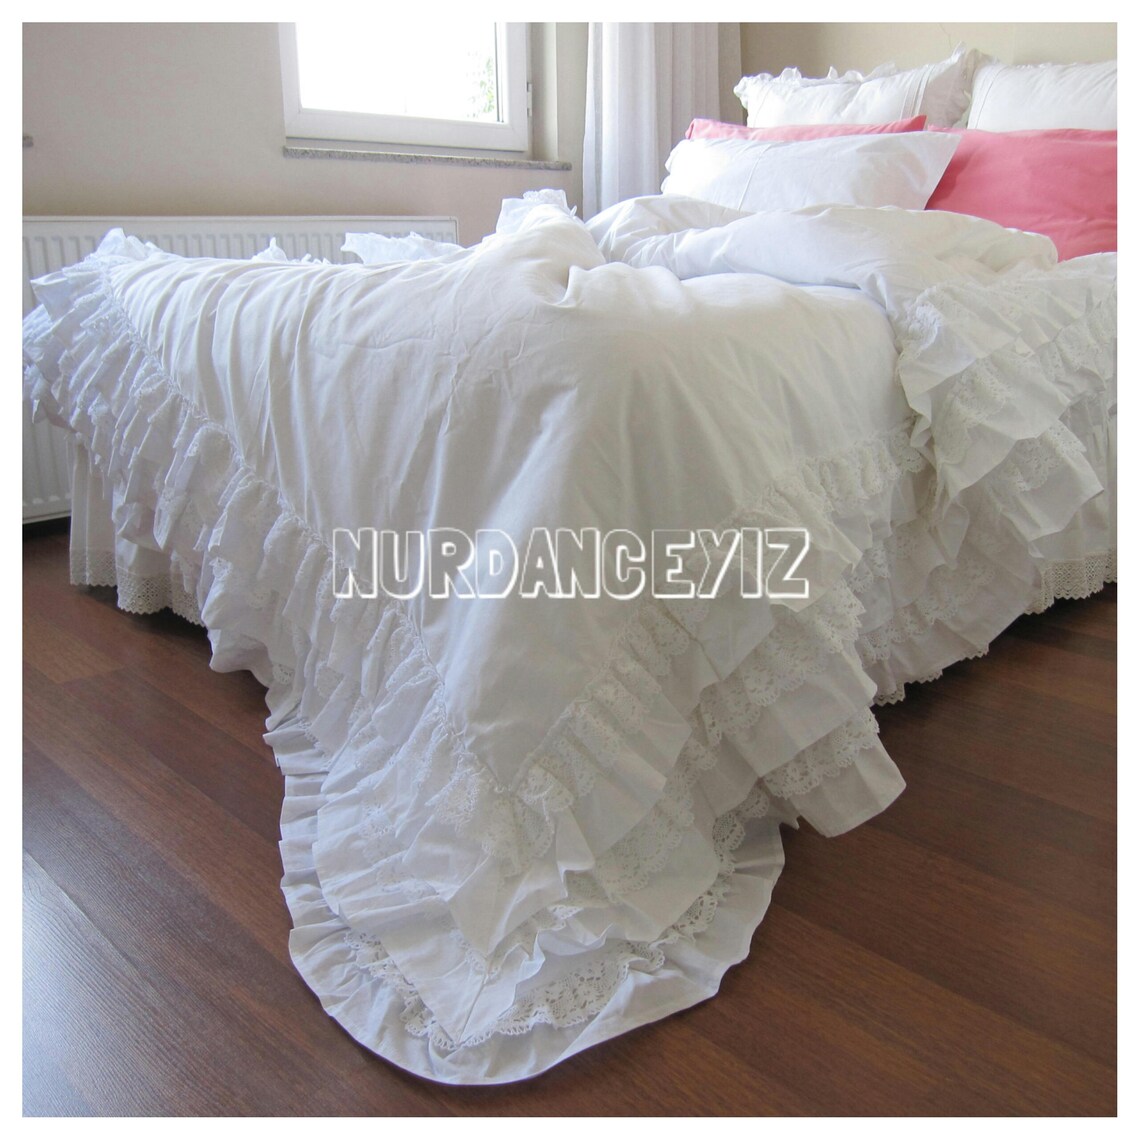 Ruffle lace frill bedding-duvet cover Queen King-solid white | Etsy